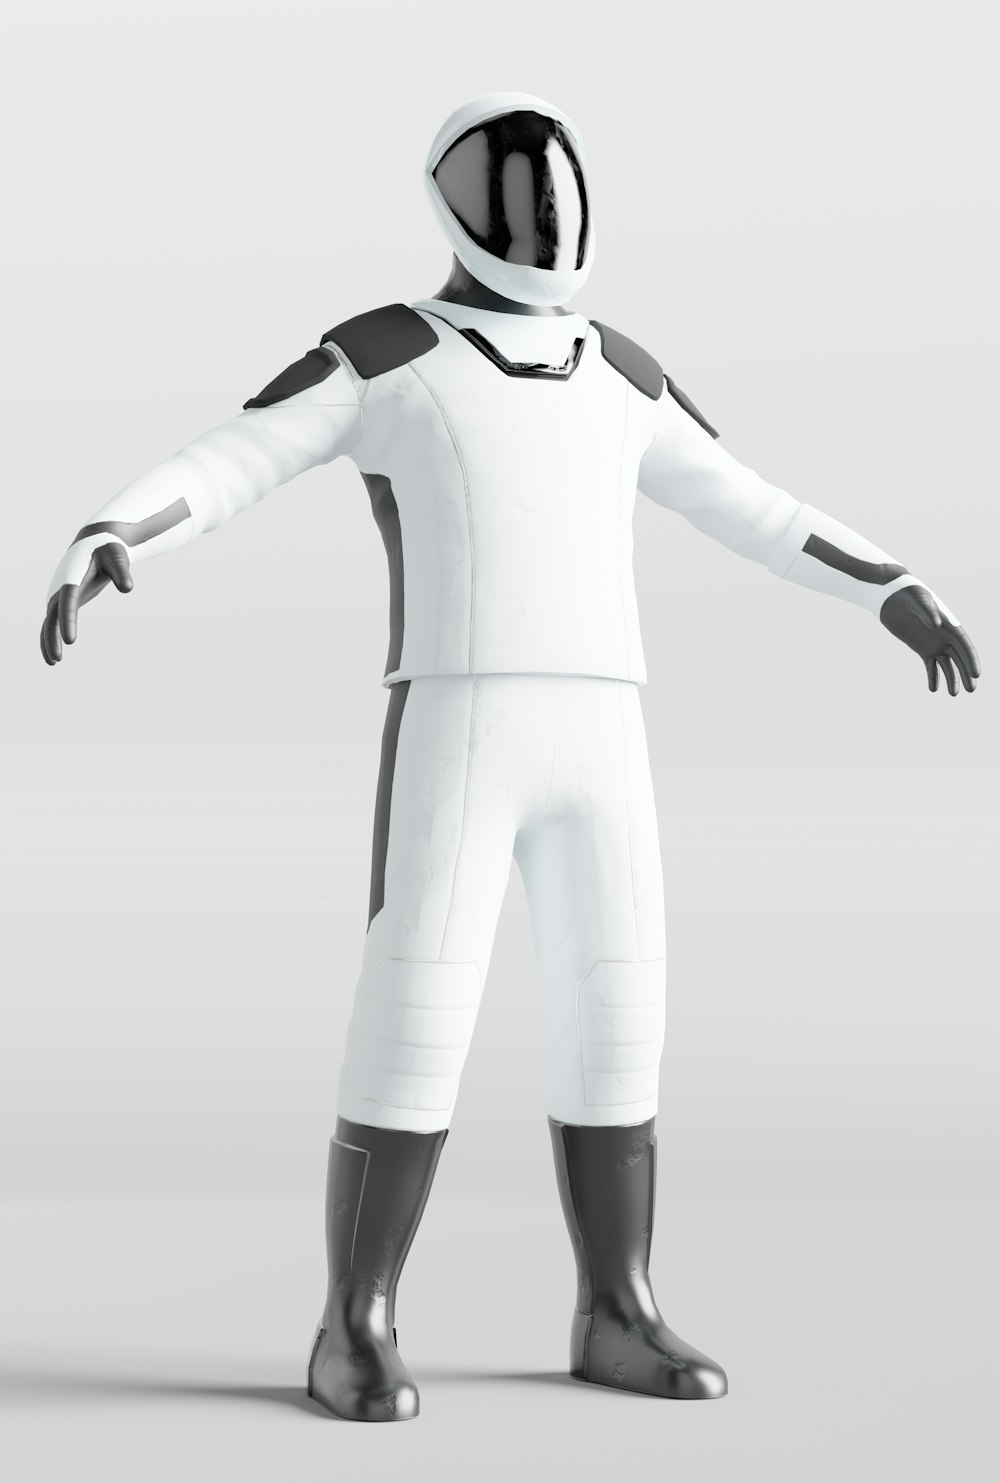 a person in a white suit and black boots